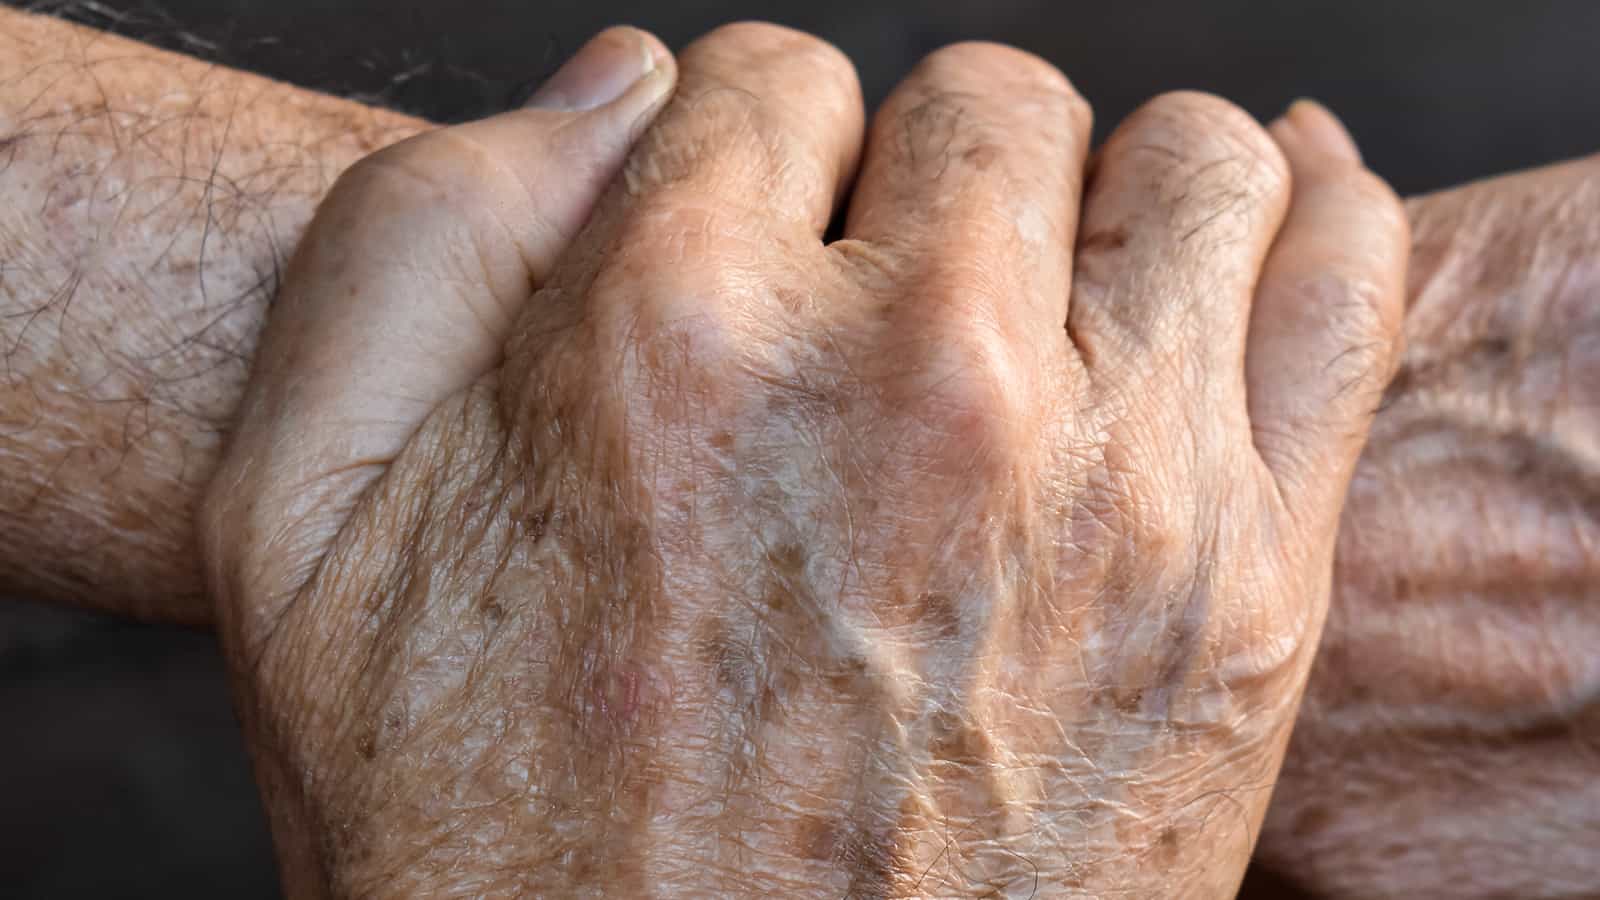 8 Things That Cause Dark Spots on the Hands (and How to Fix Them)